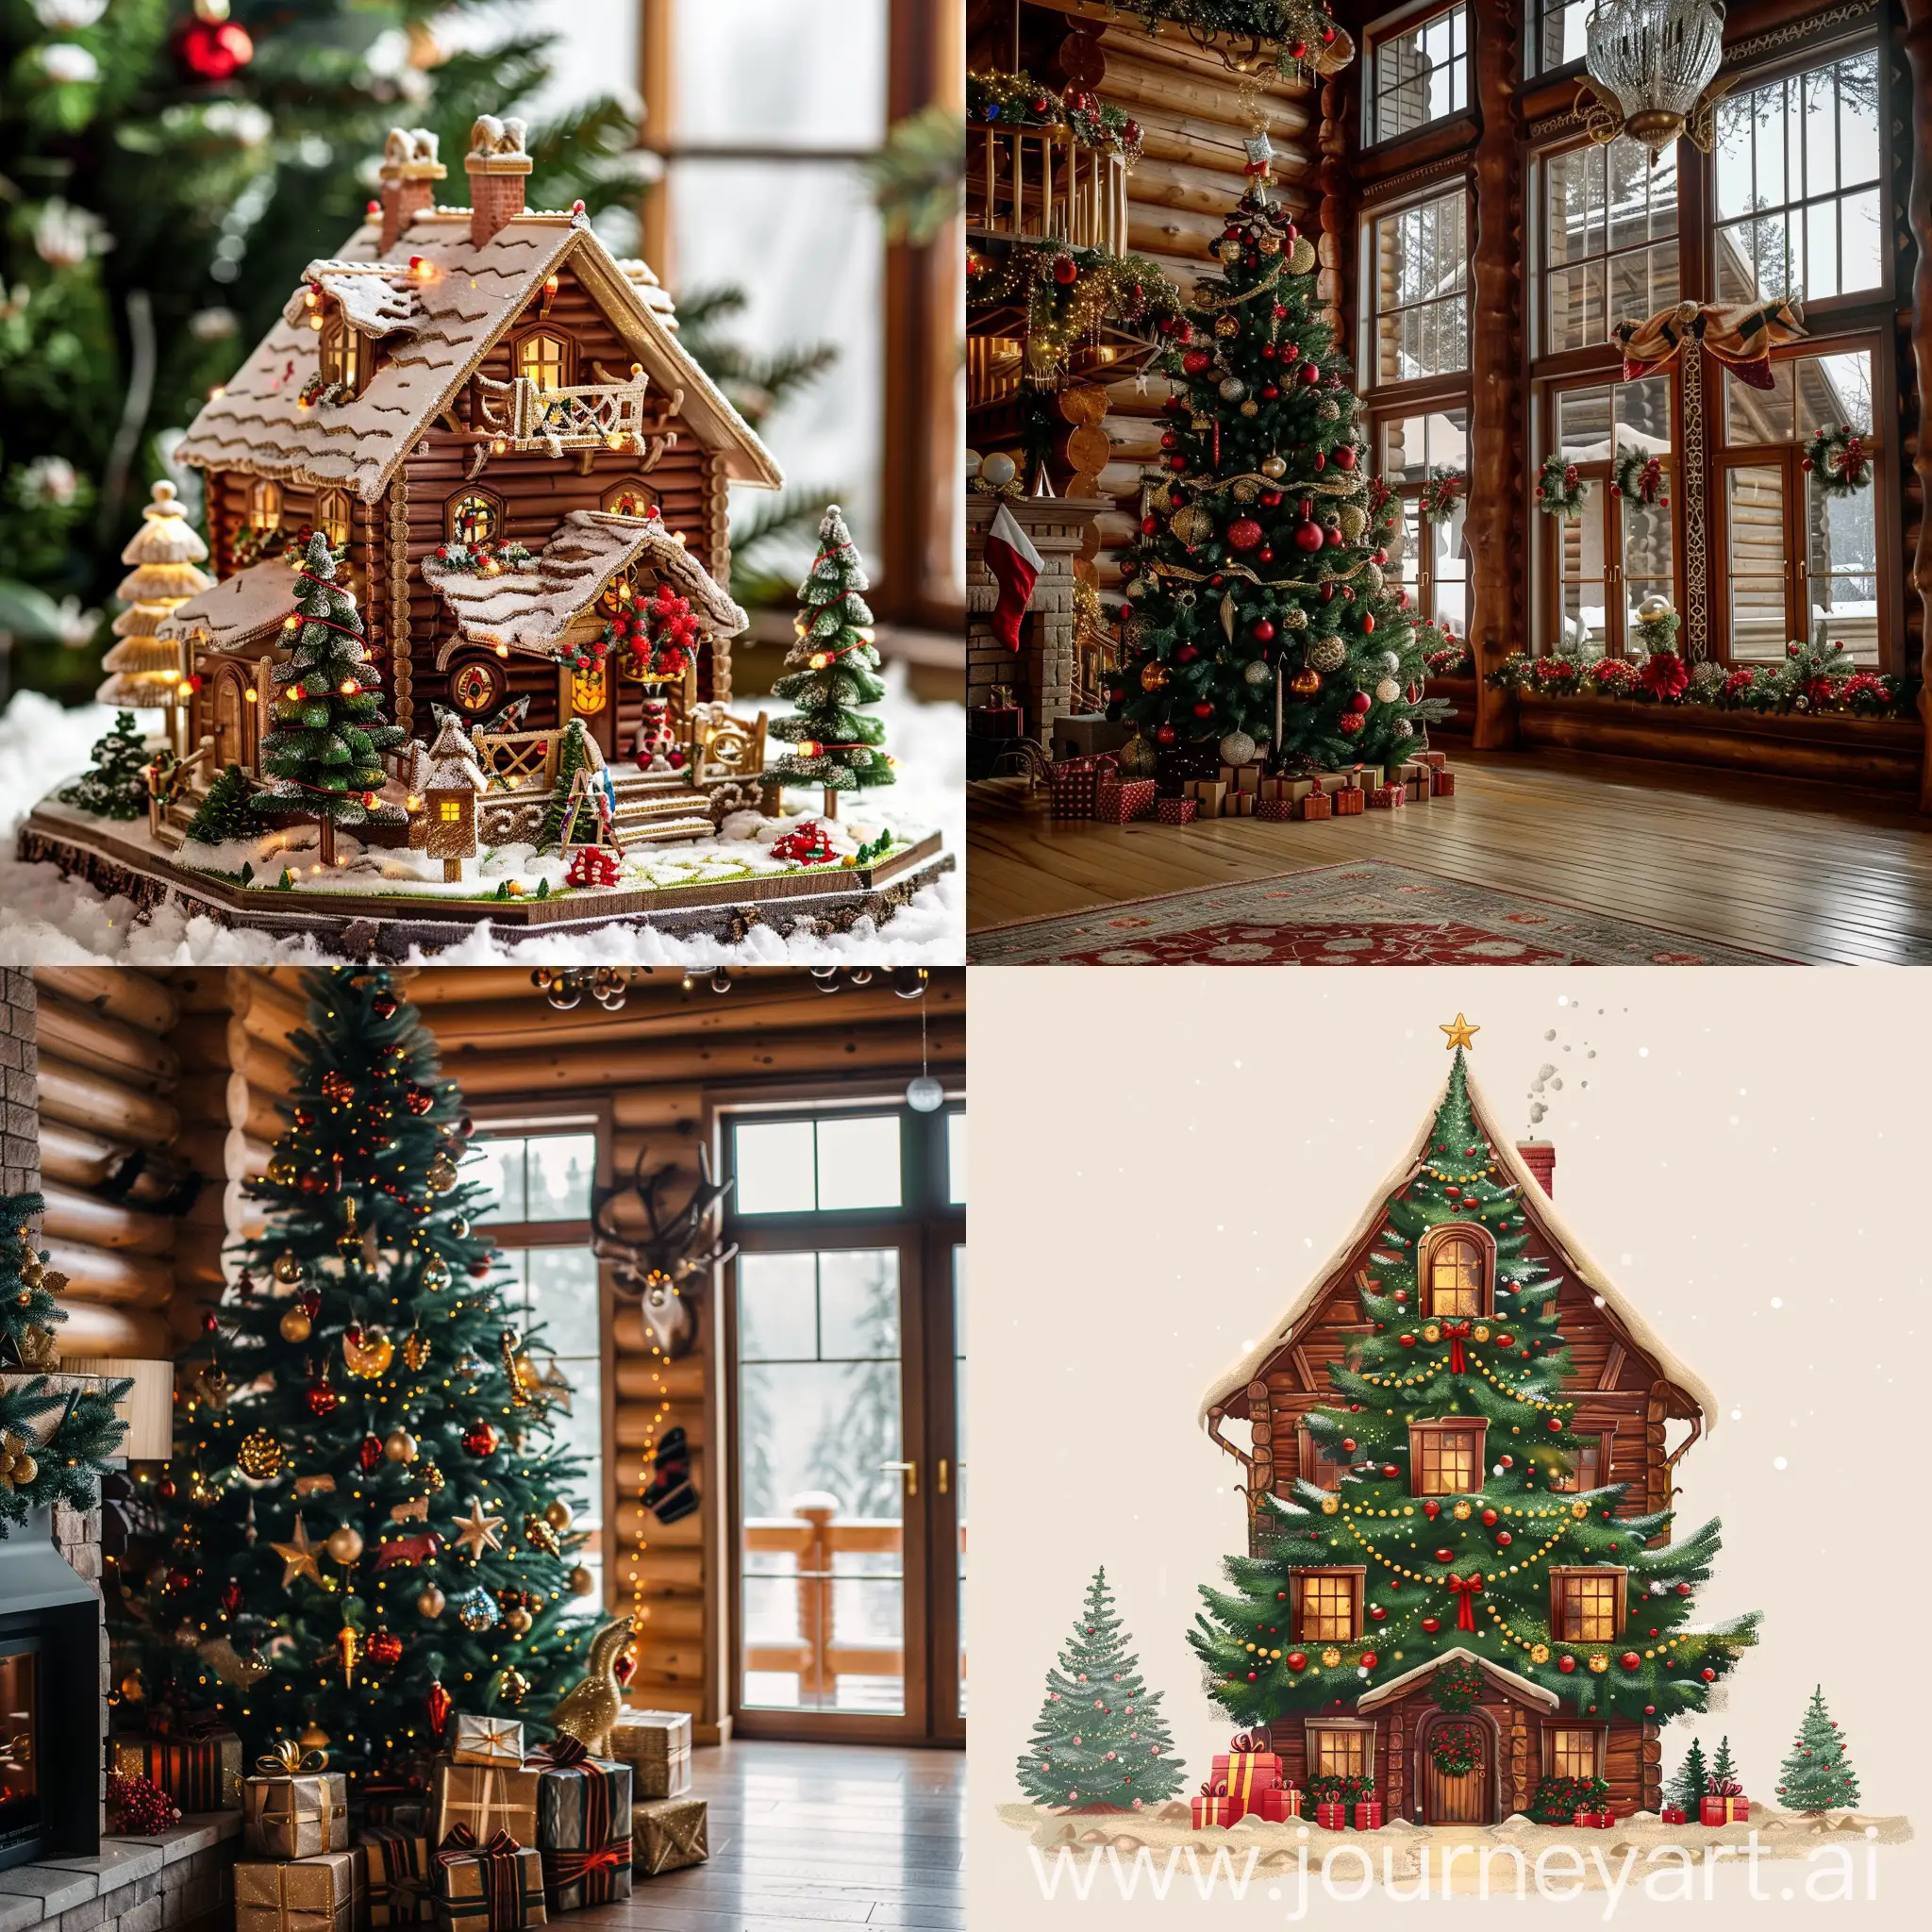 Festive-Christmas-Tree-and-Ornate-New-Year-Decorations-Around-a-Large-Wooden-House